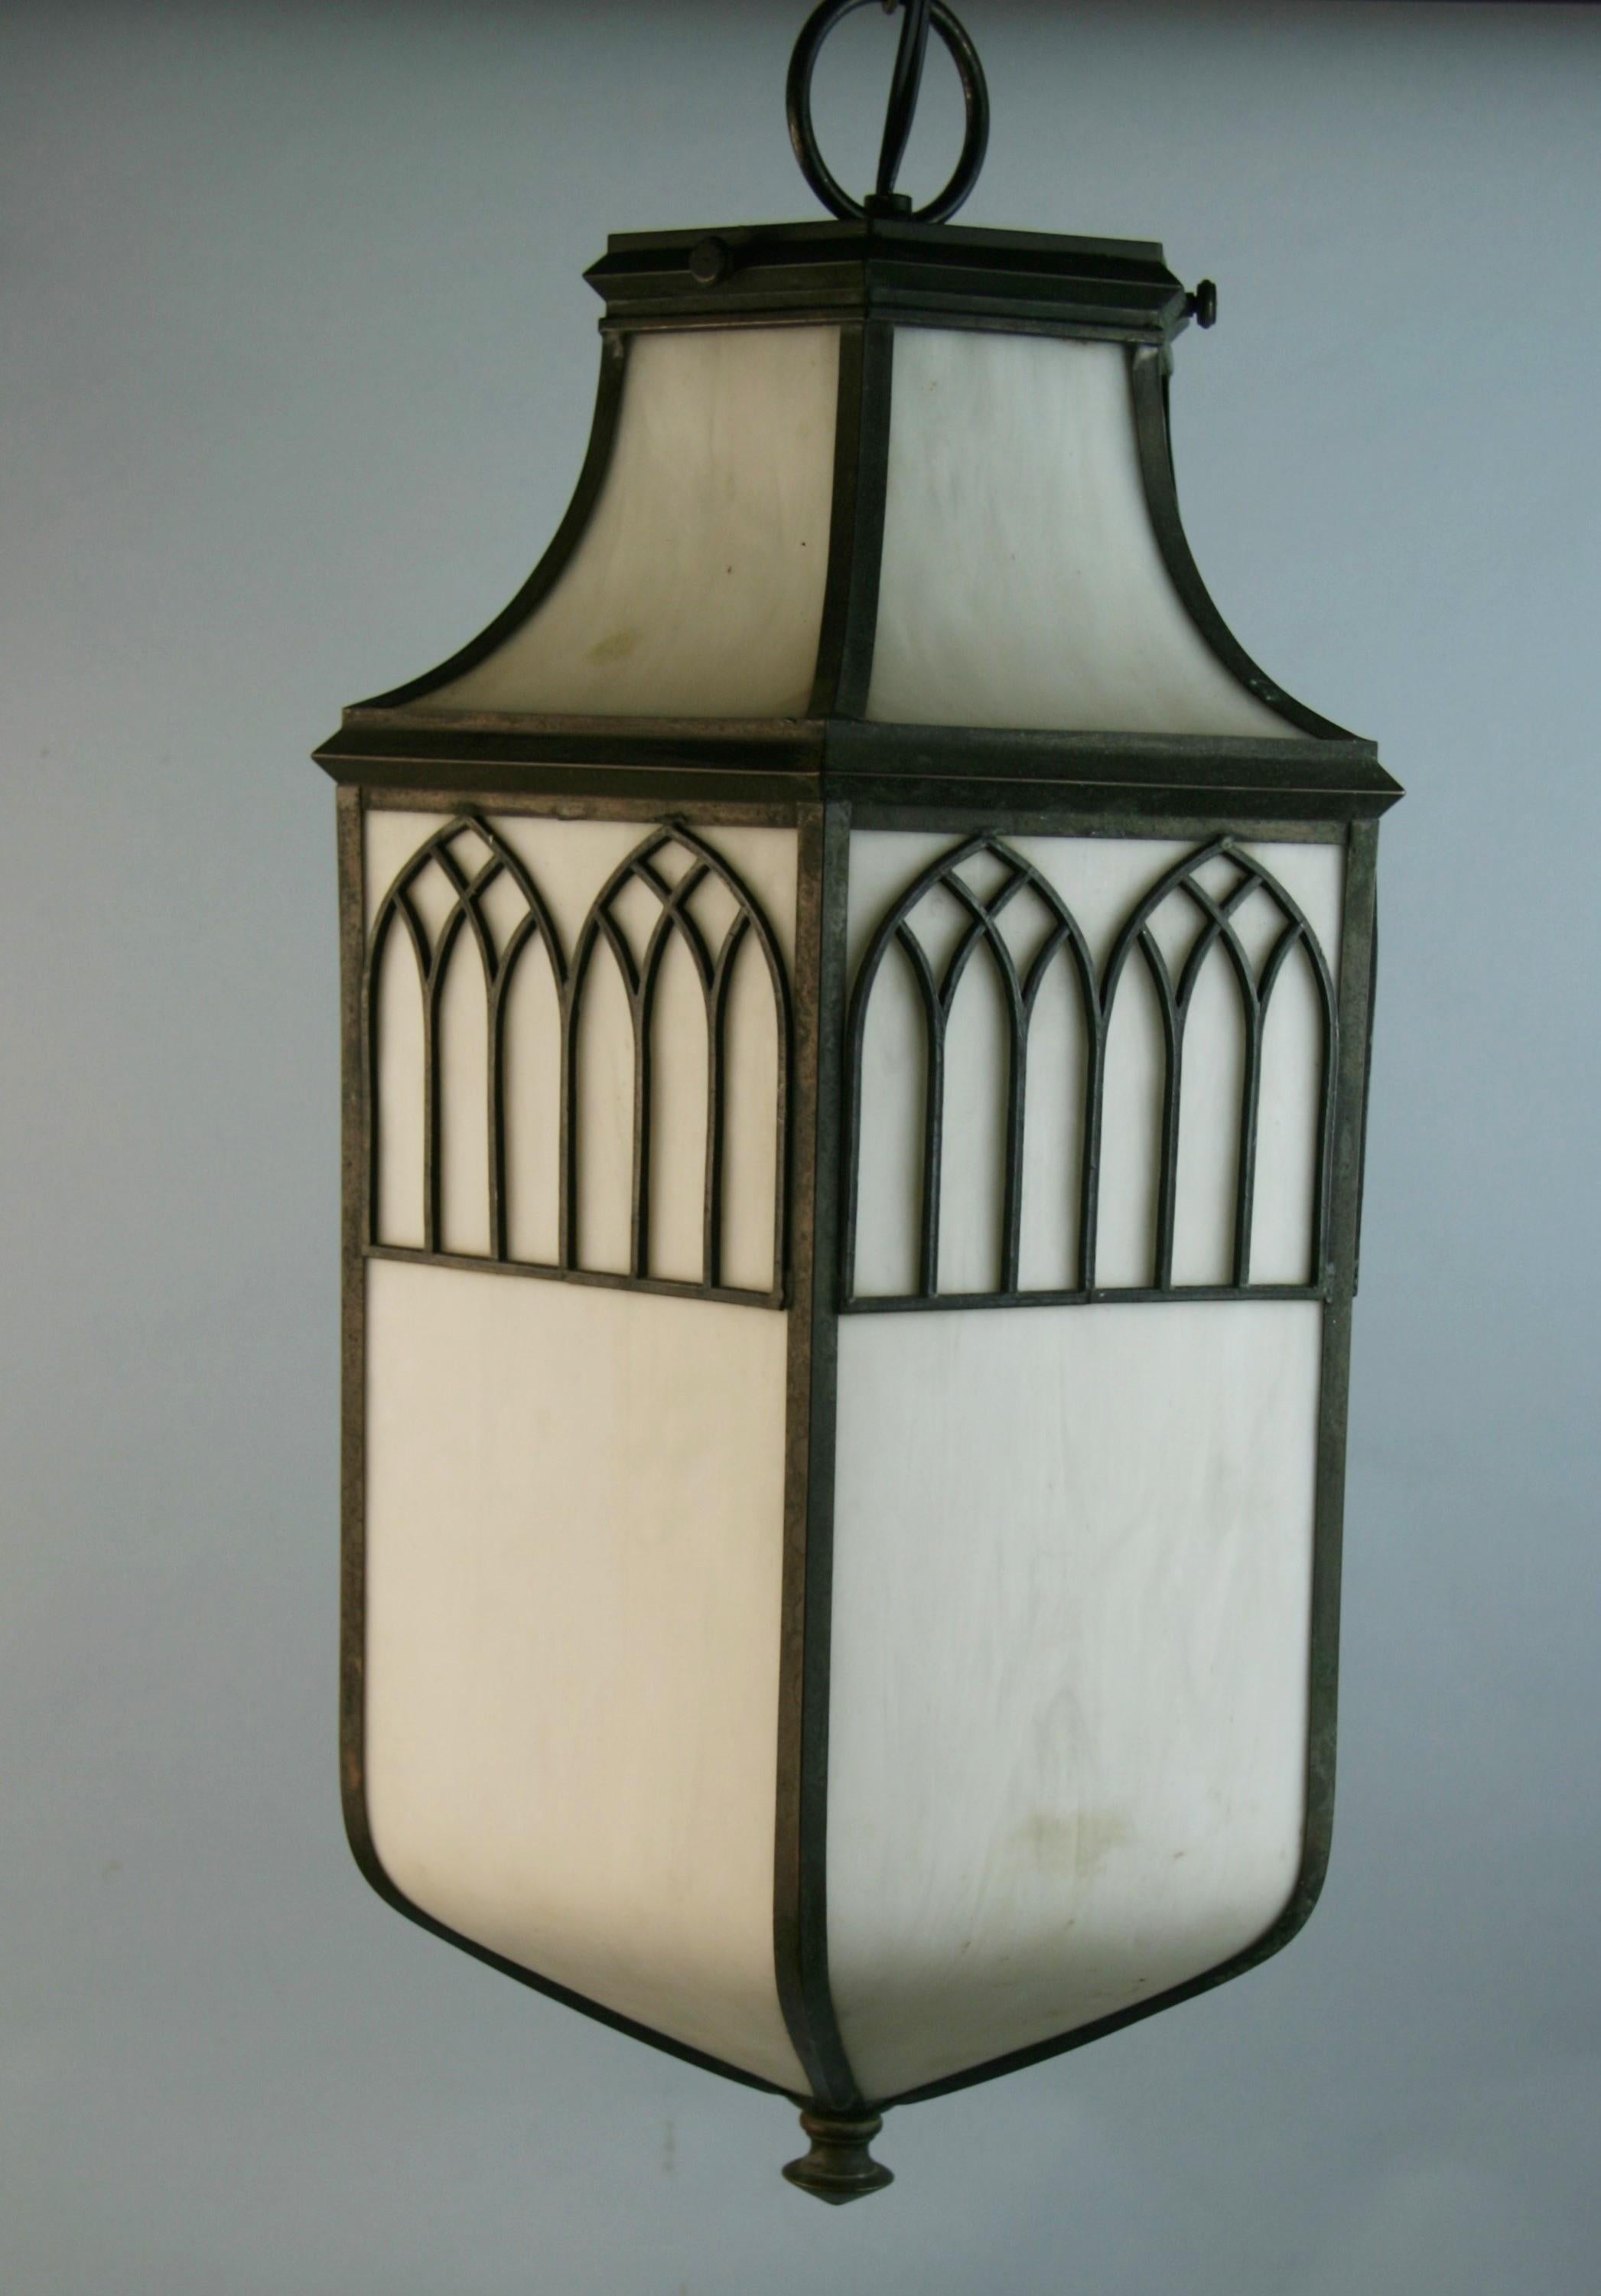 1251 White leaded glass encased in bronze.
Take one 100 watt Edison based bulb
Supplied with 2' chain and canopy.